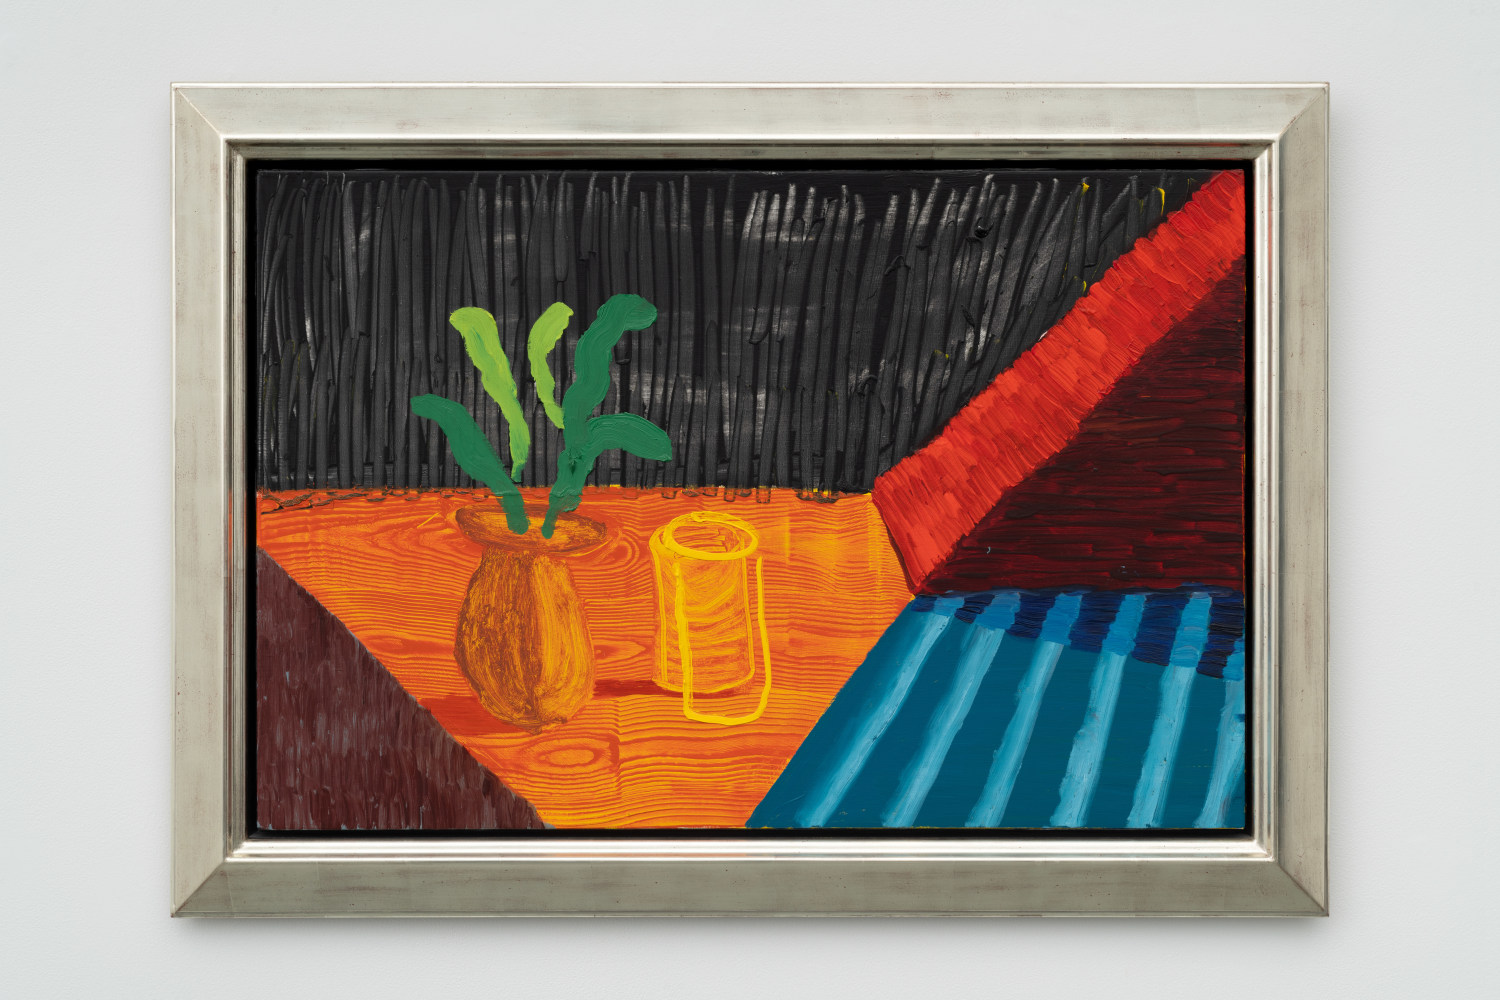 David Hockney
Glass of Lemonade, 1991
Oil on canvas
24 &amp;times; 36 inches (61 &amp;times; 91.4 cm)
Sold